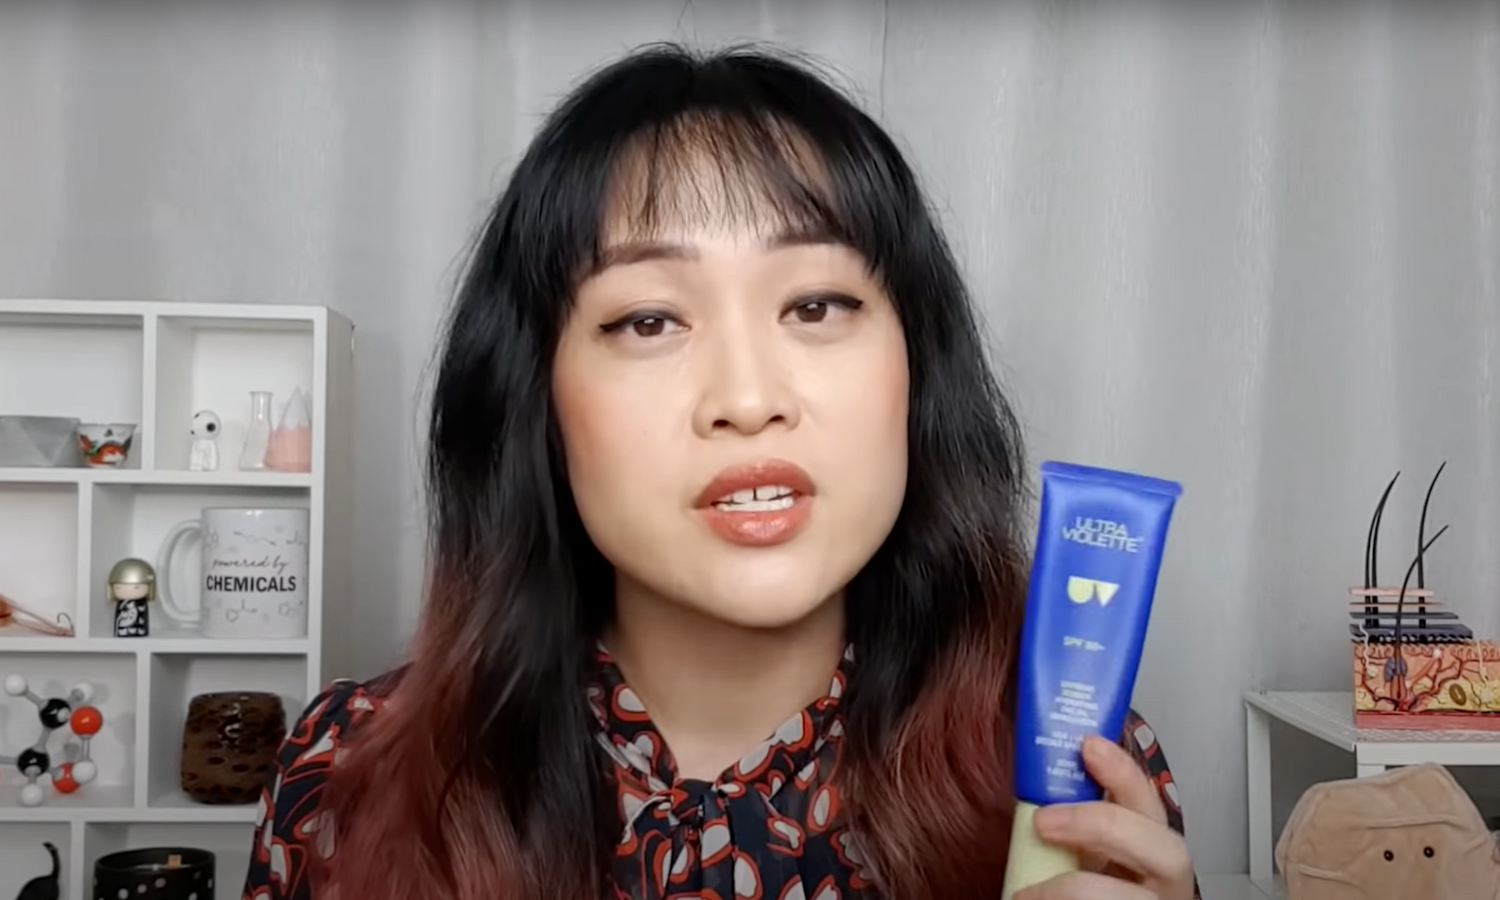 Michelle Wong holding Supreme Screen up next to her face.